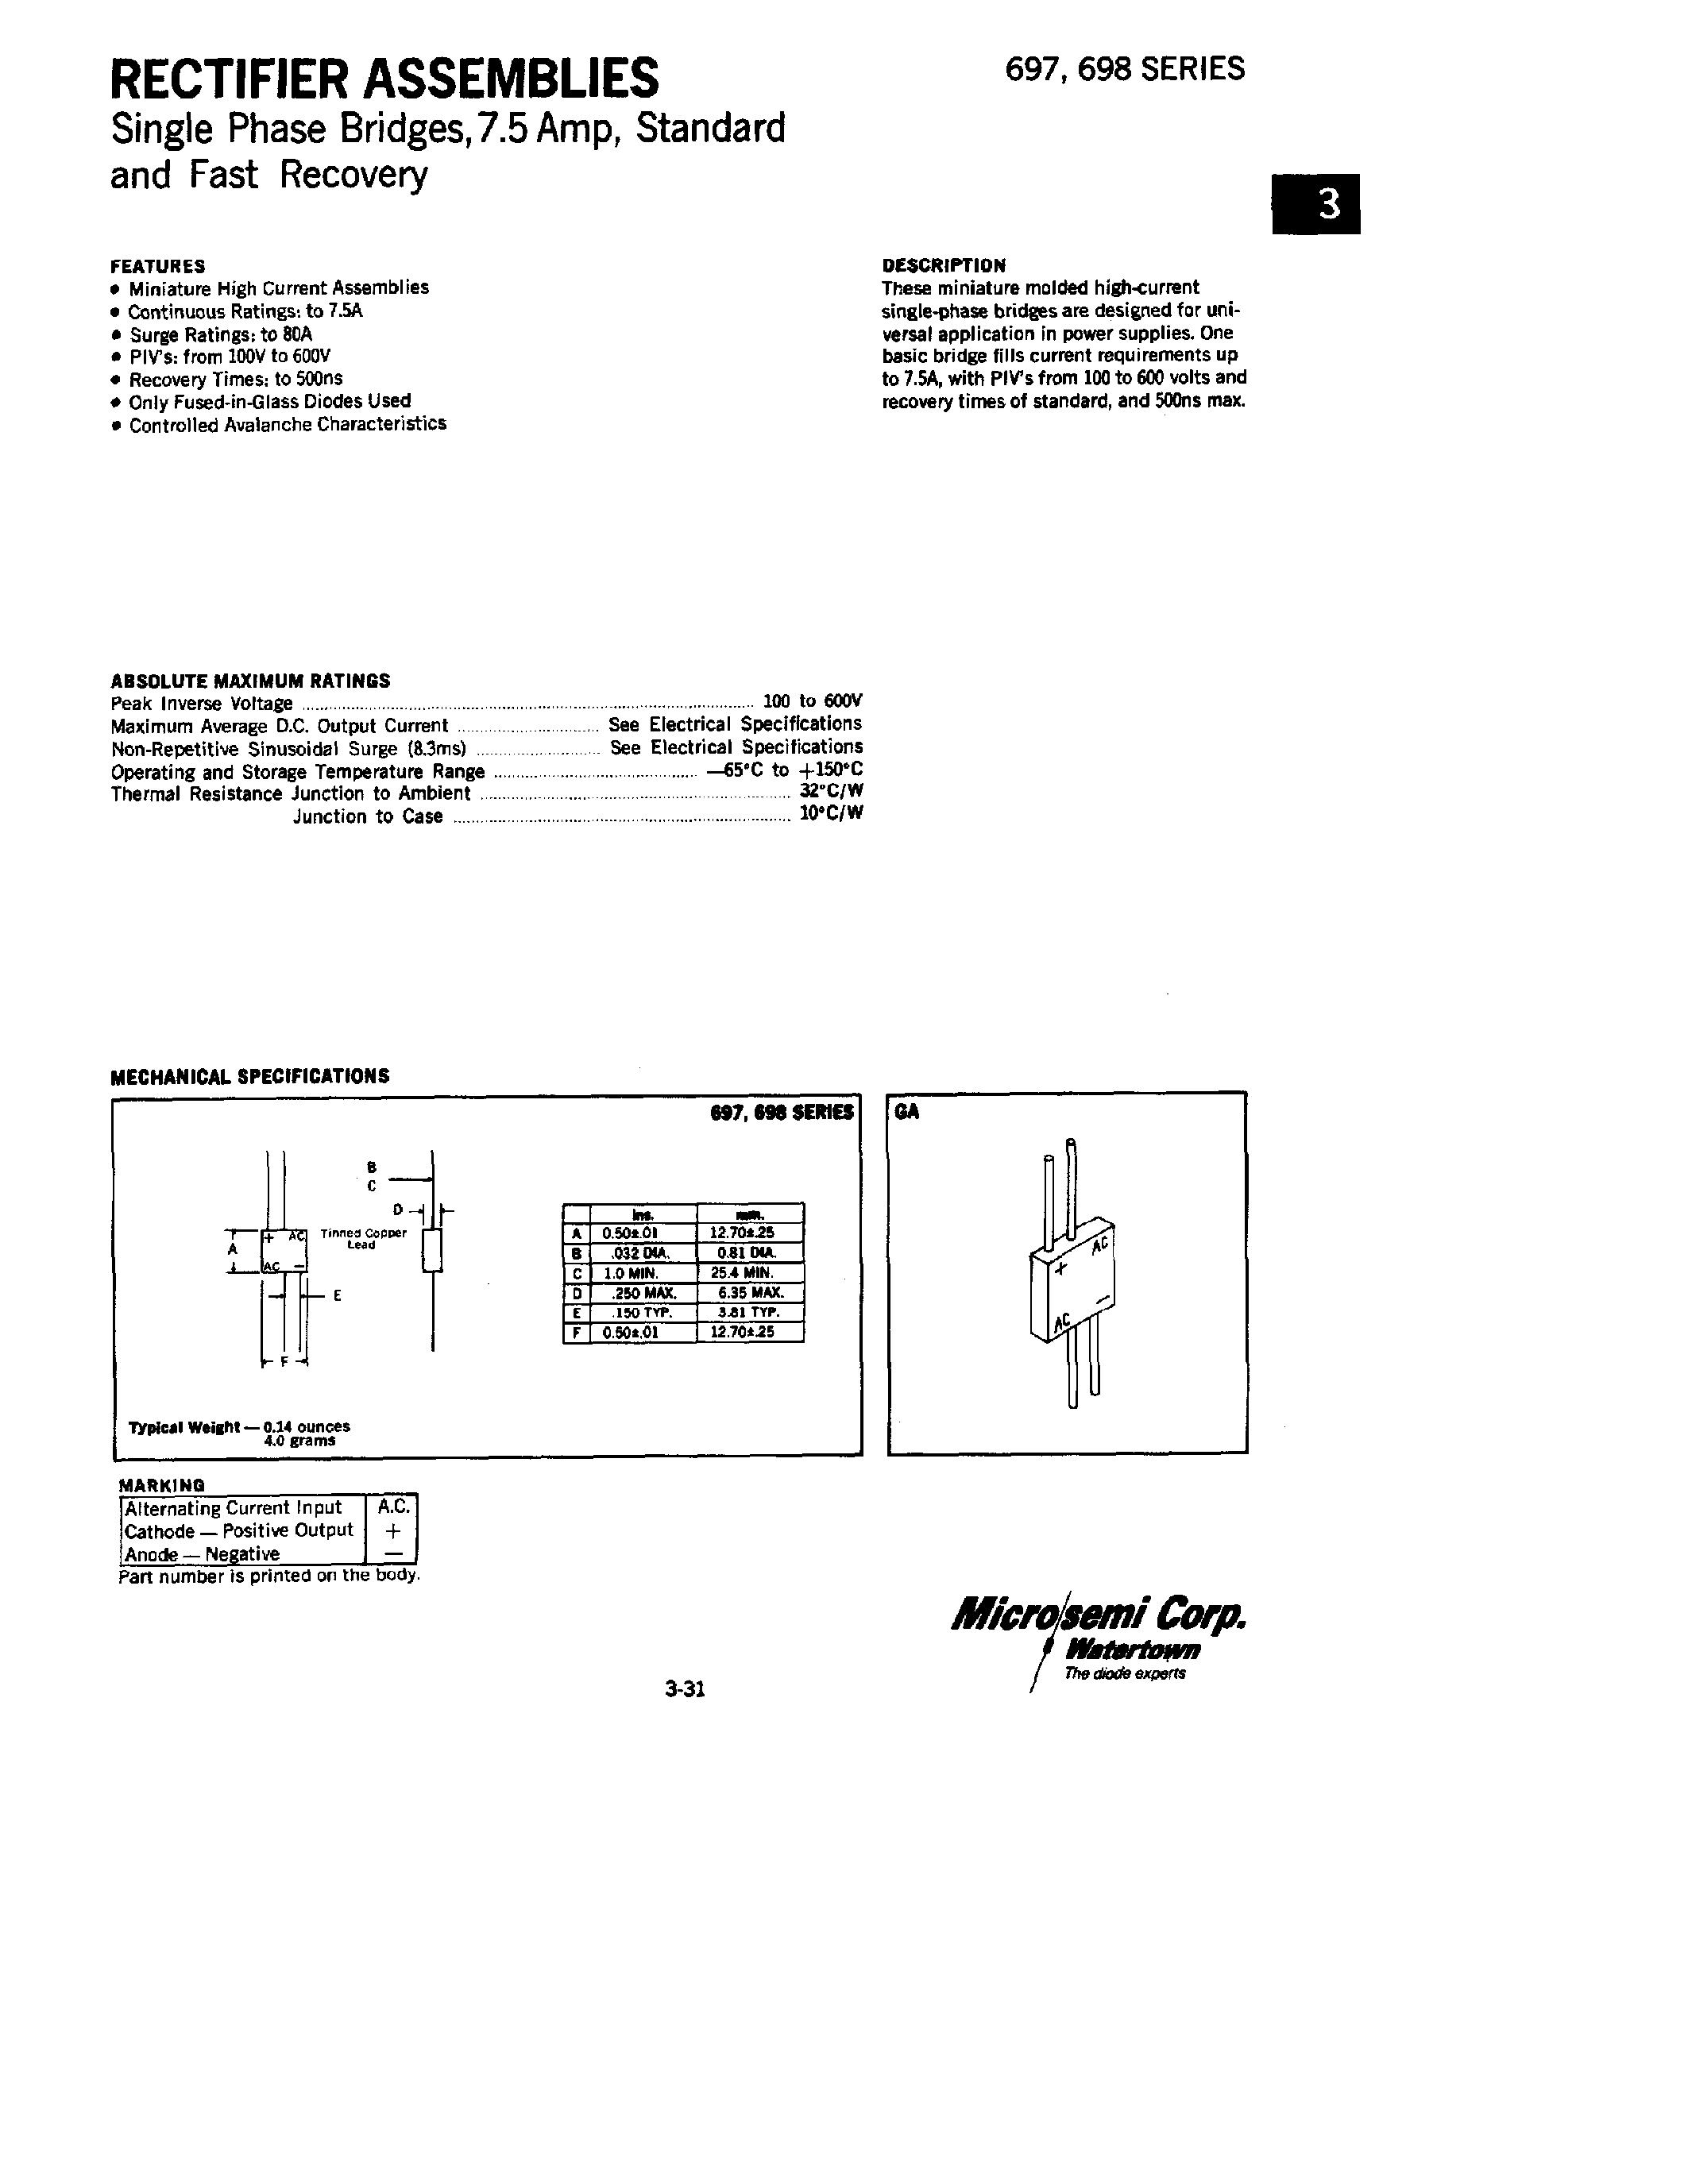 Datasheet 698-5 - RECTIFIERS ASSEMBLIES SINGLE PHASE BRIDGES/ 7.5 AMP/ STANDARD AND FAST RECOVERY page 1